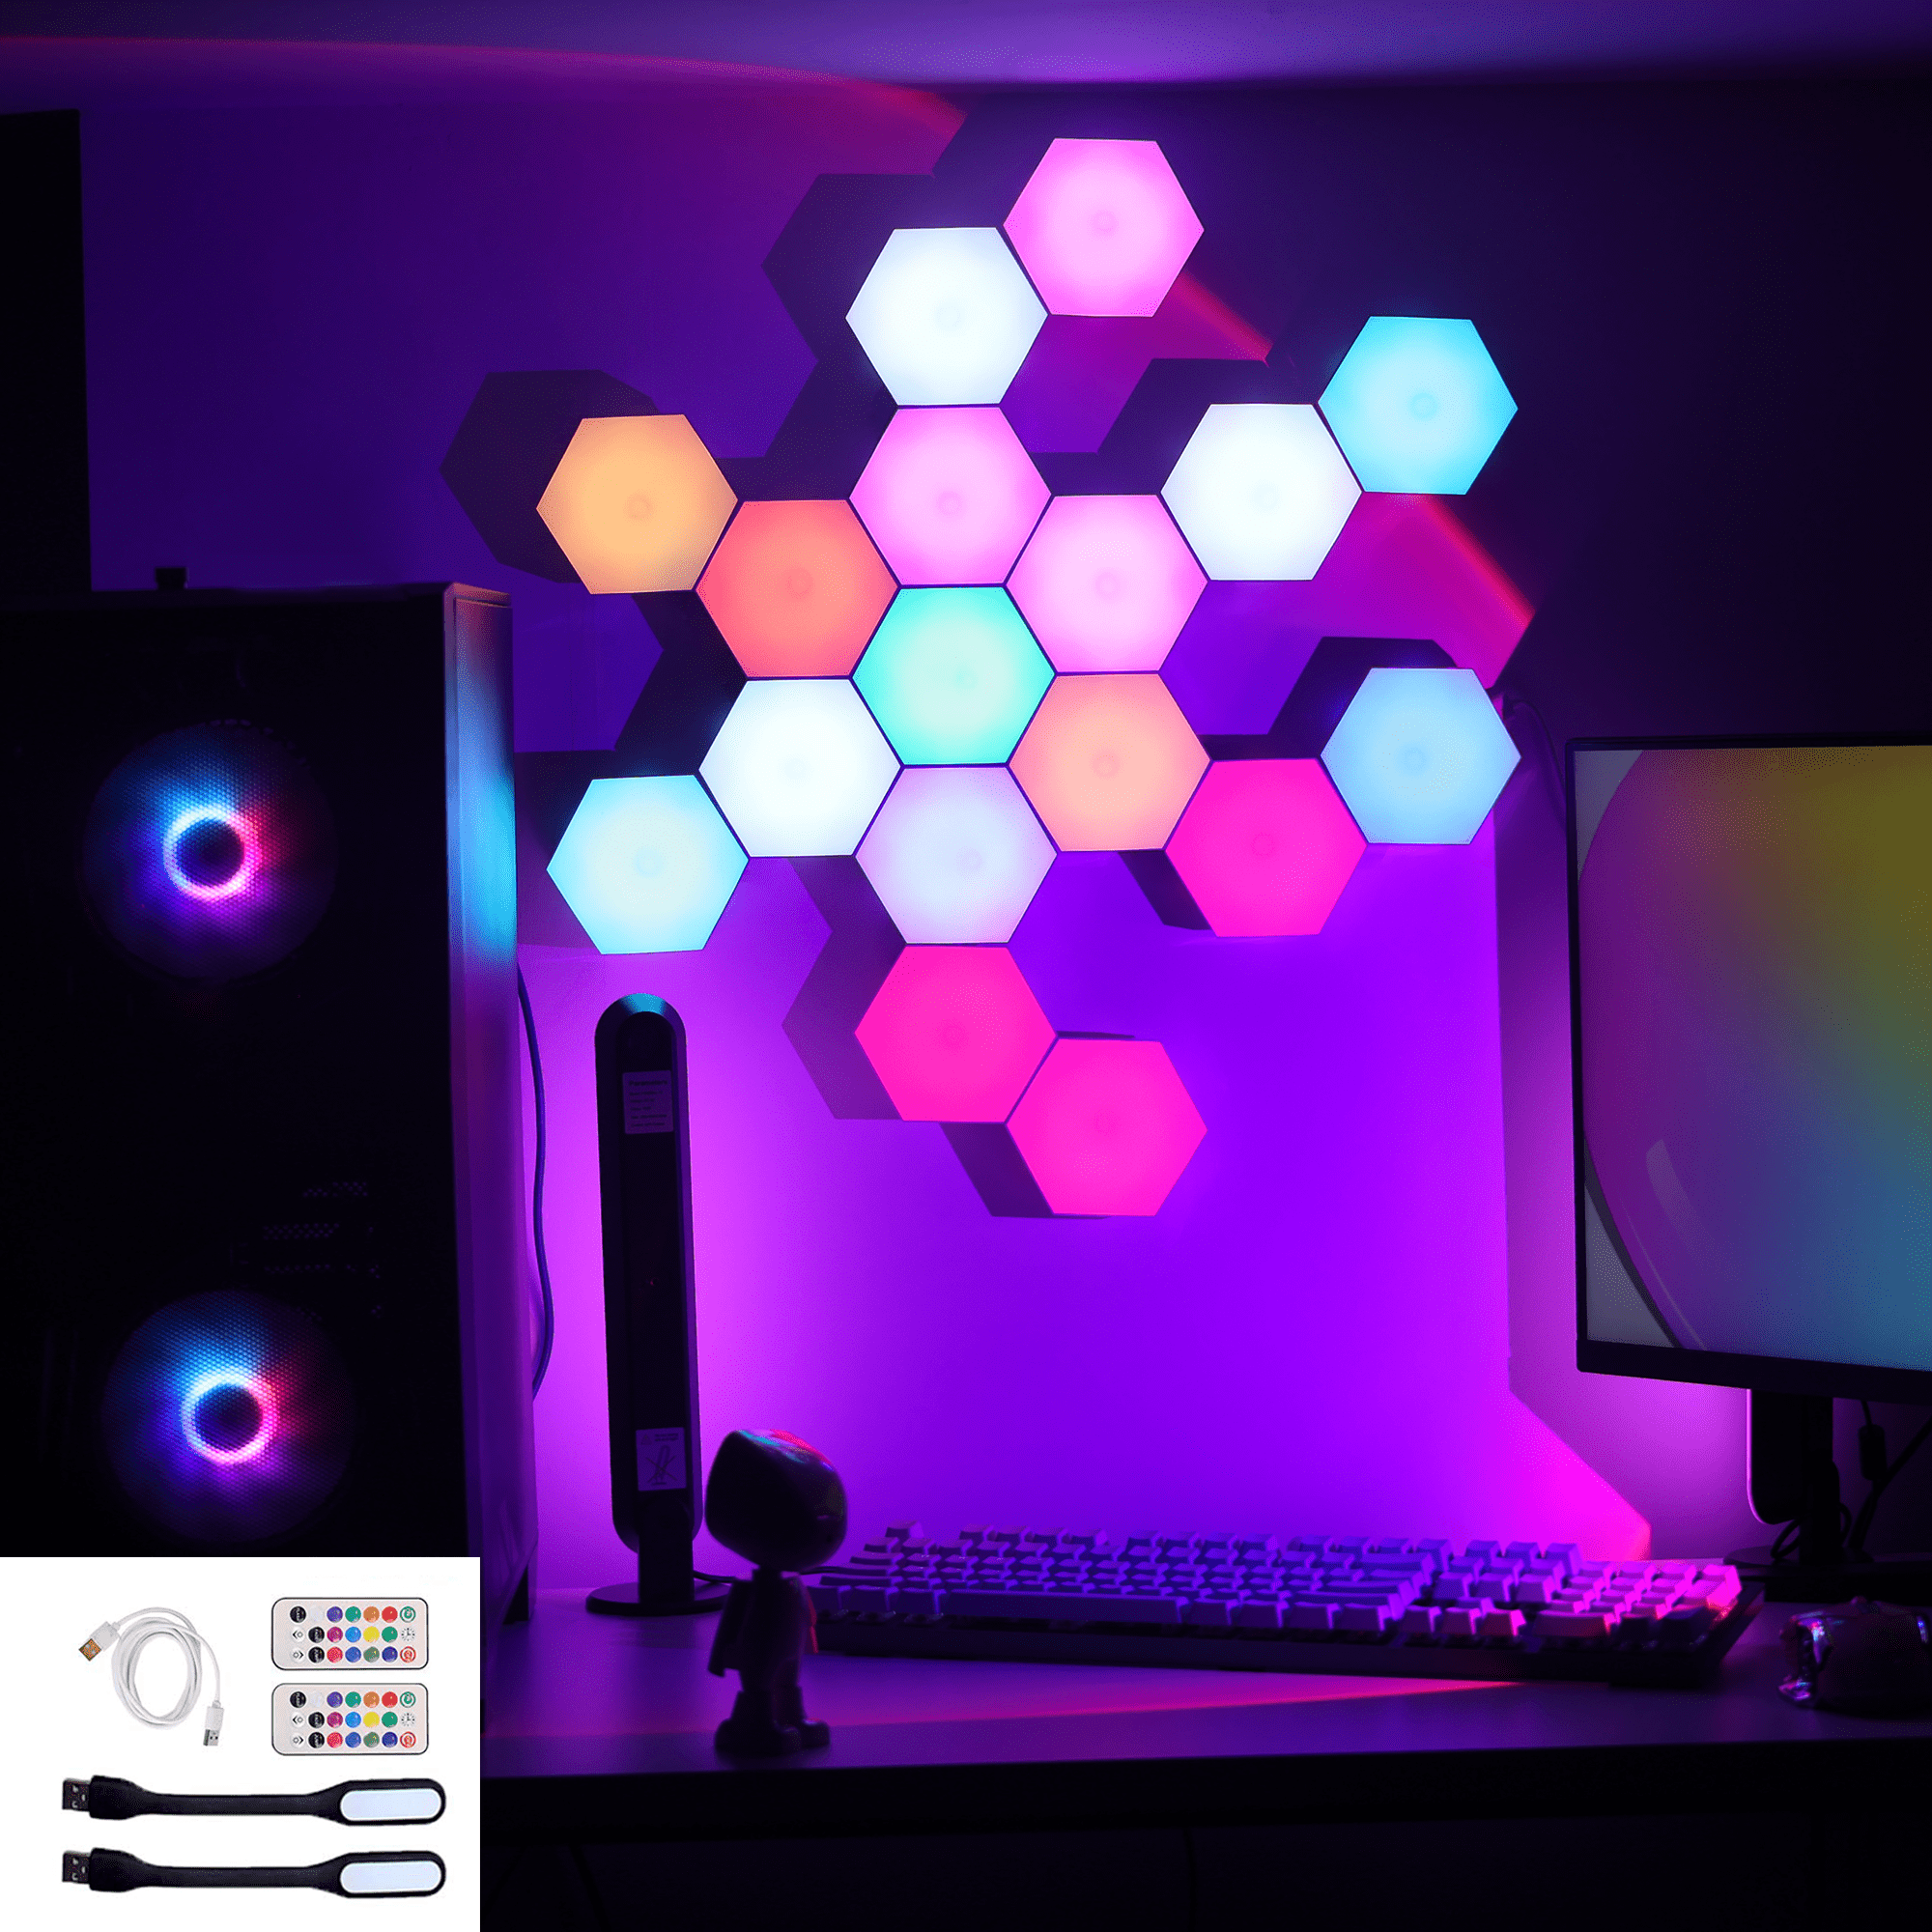 Arcwares RGB LED Hexagon Lights 6-Pack with Remote Control and Touch Sensor  - DIY Smart Wall Decor for Game Room, Party, 16 Million Colors